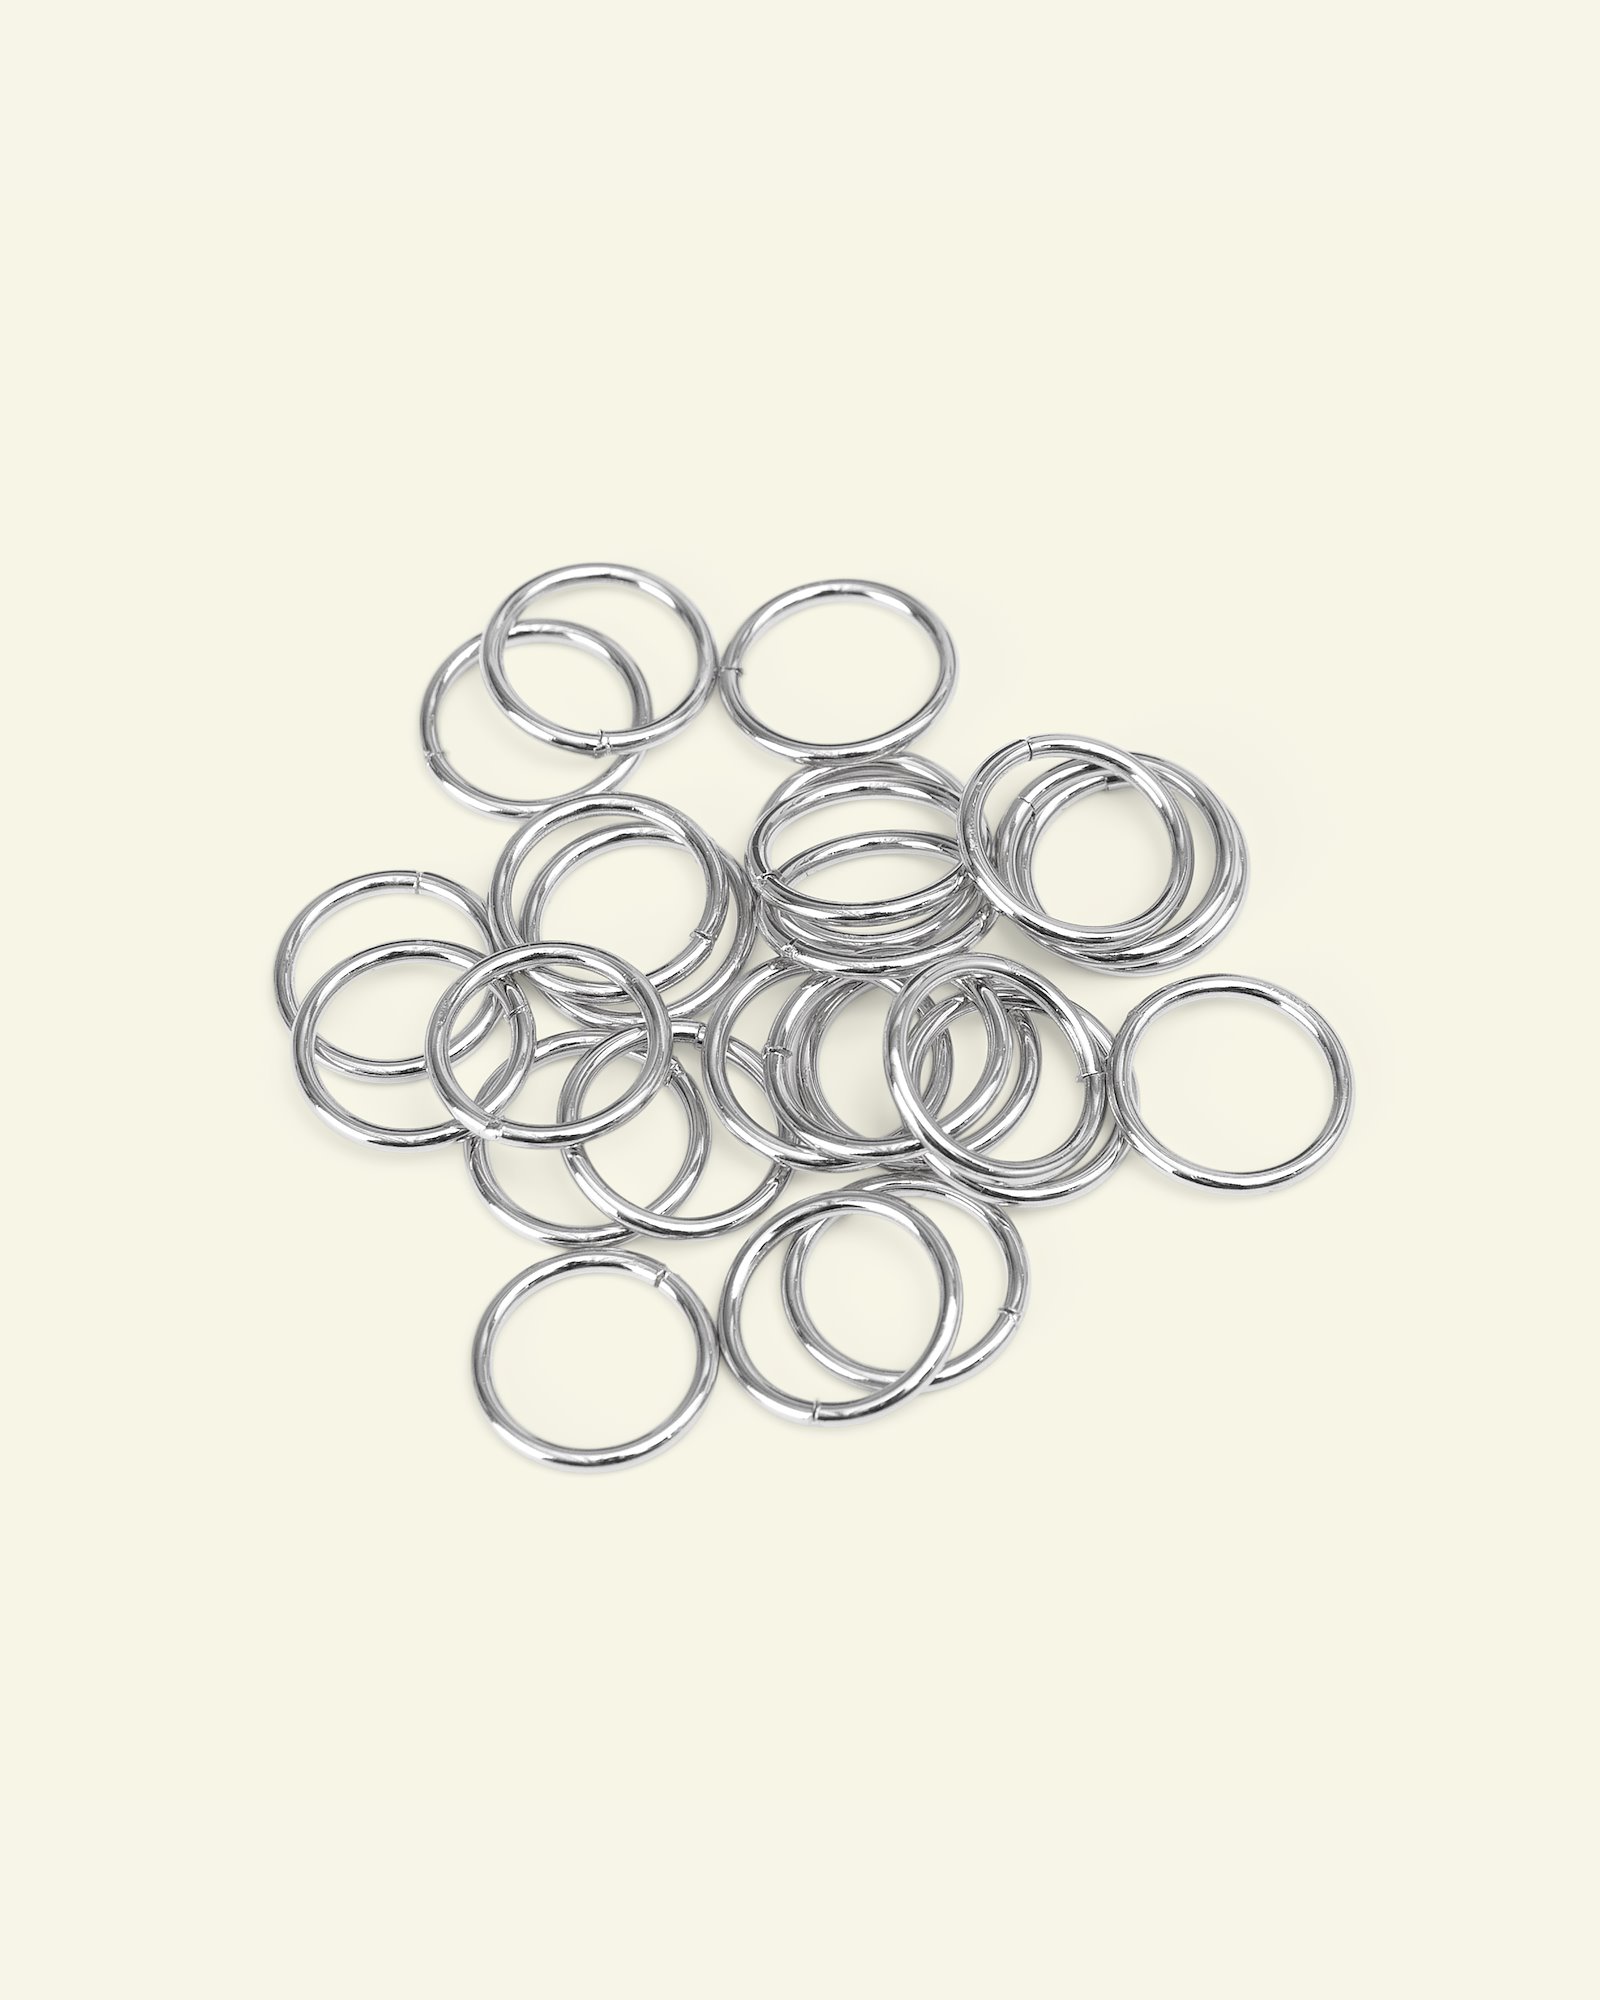 Ring Metall 15/12mm silber 25Stk 40601_pack